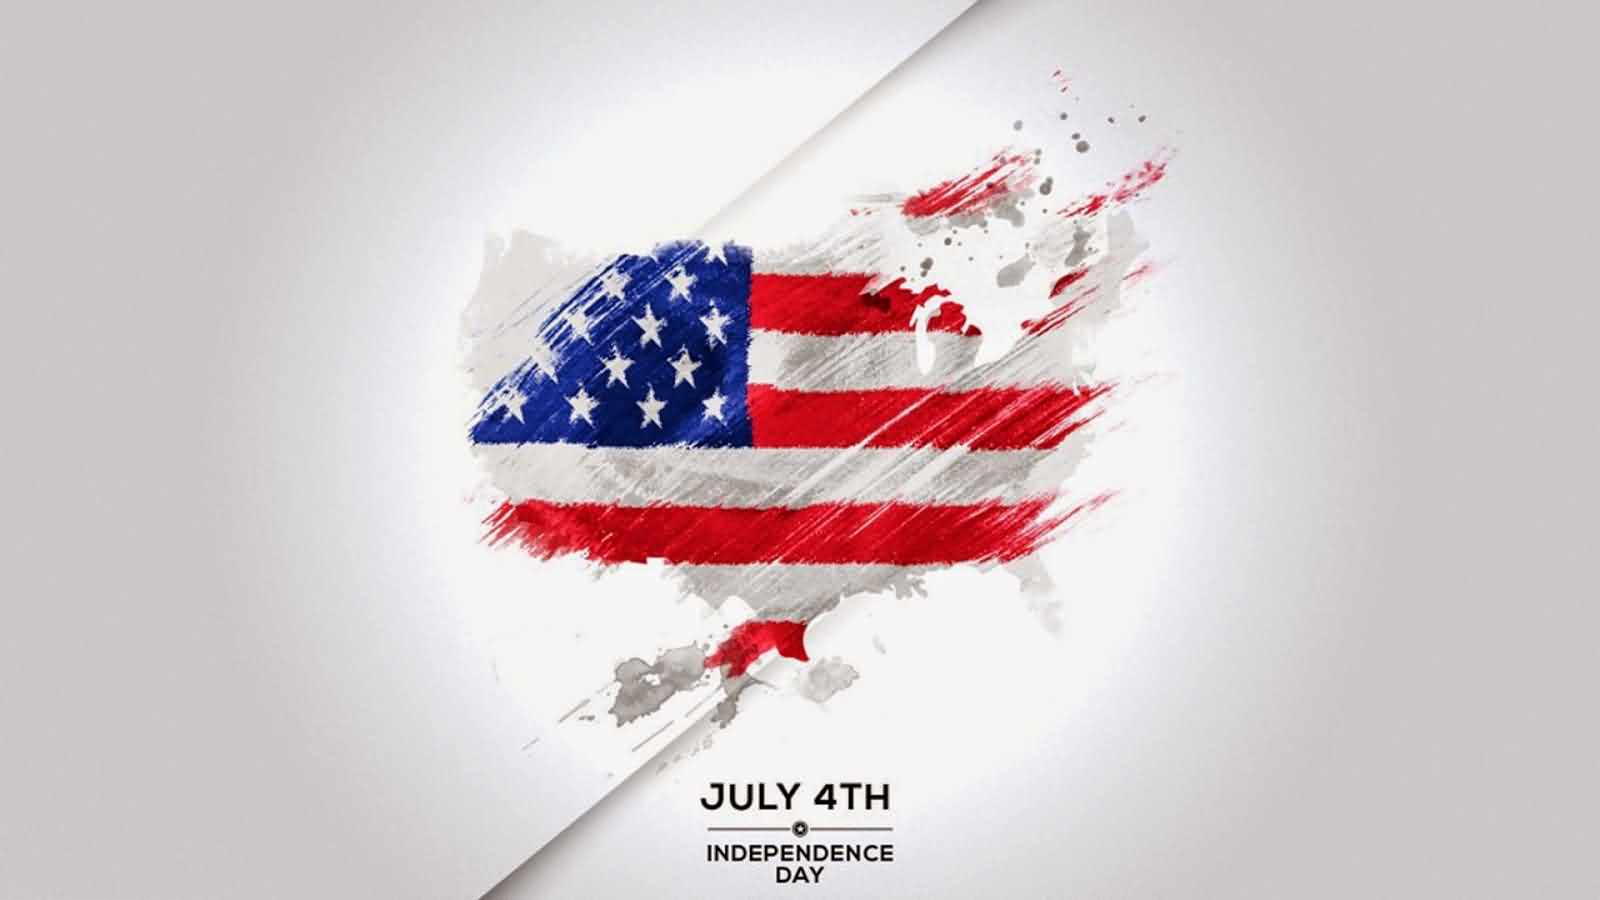 Awesome The Fourth of July Happy Independence Day Wishes Wallpaper